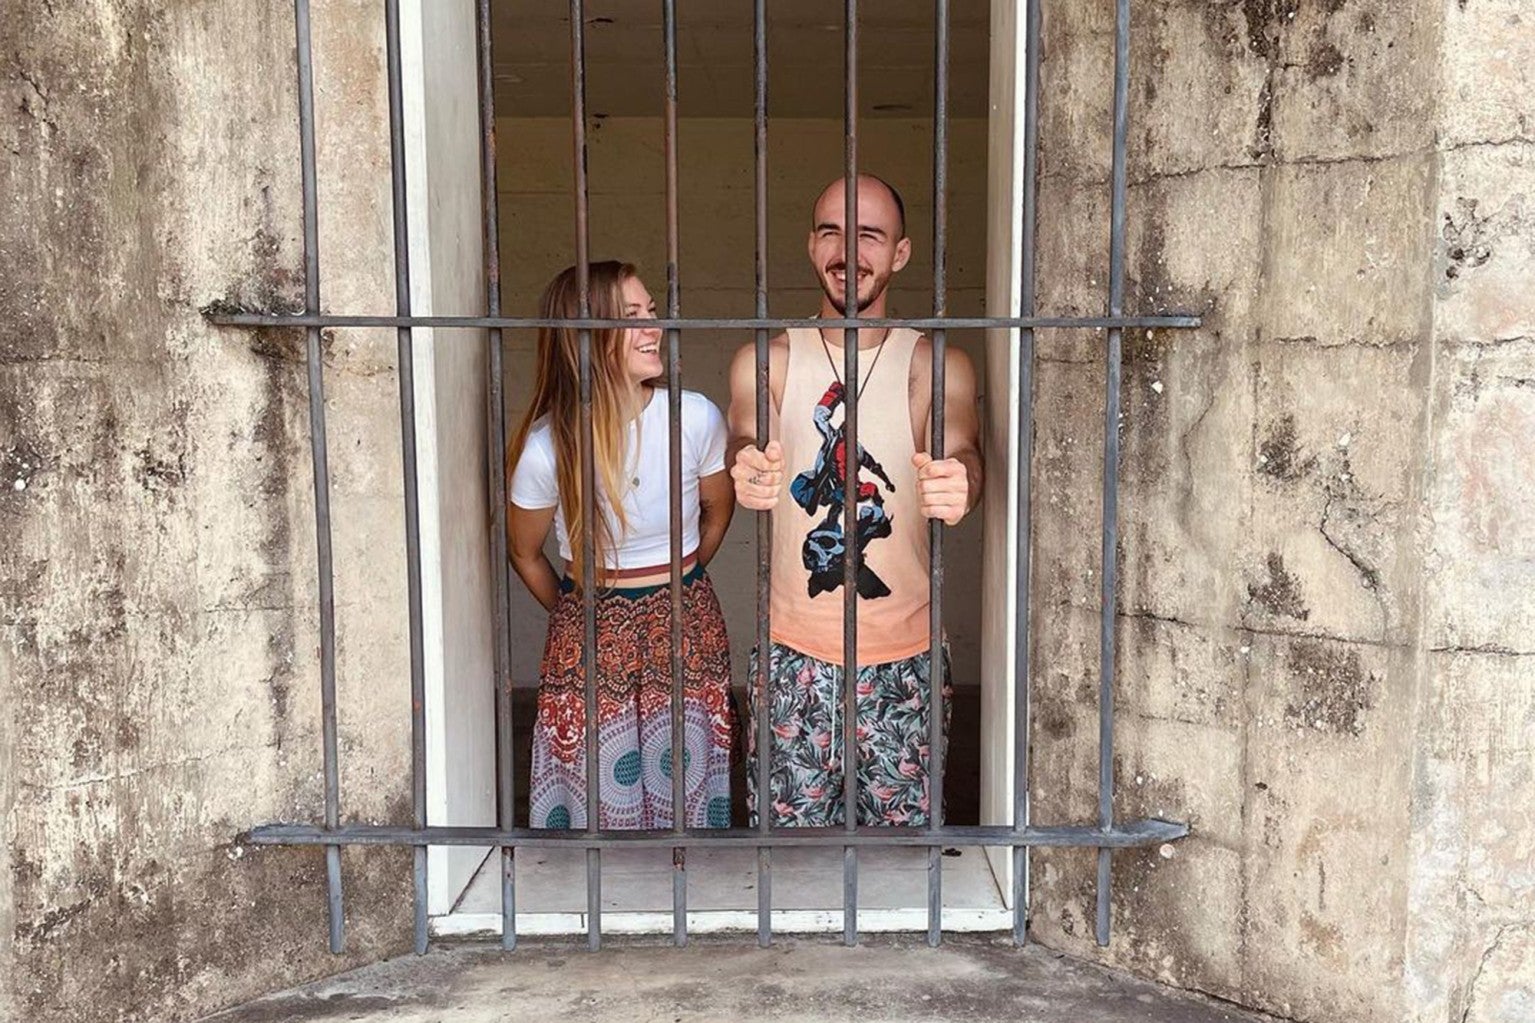 An image from Gabby Petito’s Instagram shows her and Brian Laundrie at Fort De Soto Park in Florida